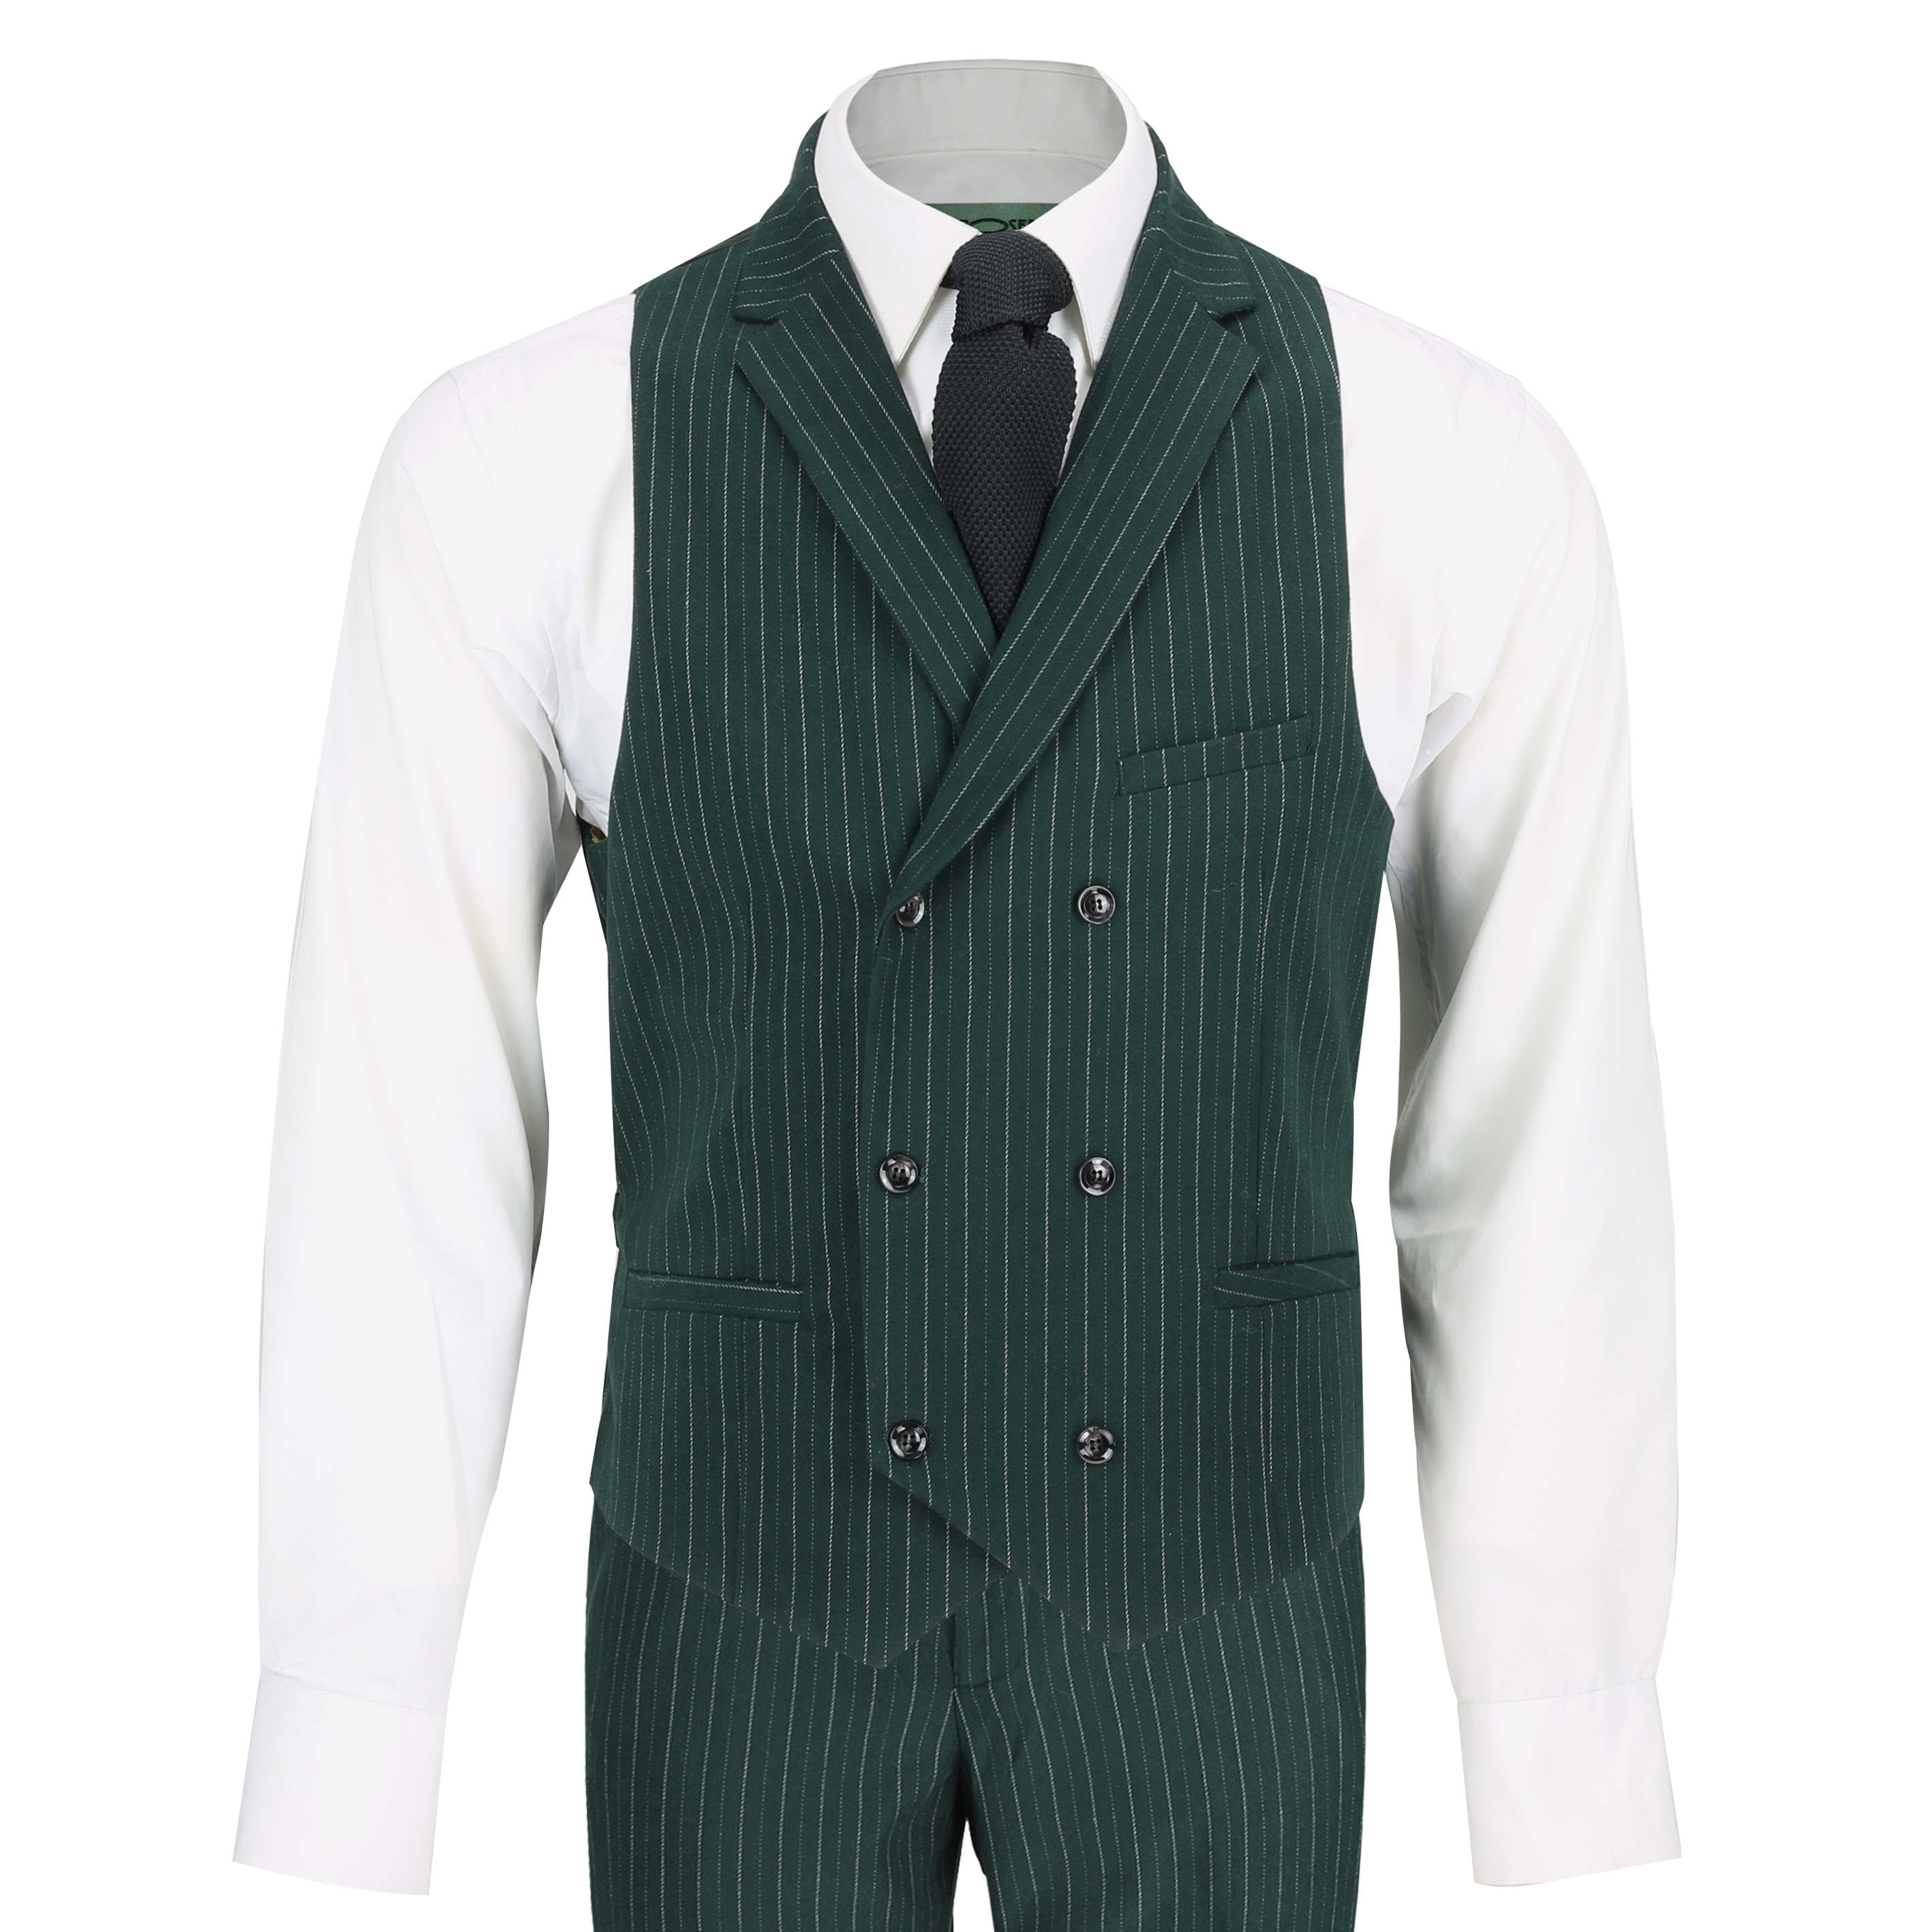 Mens 3 Piece Suit Green Pinstripe 1920S Tailored Fit Jacket Trouser Waistcoat